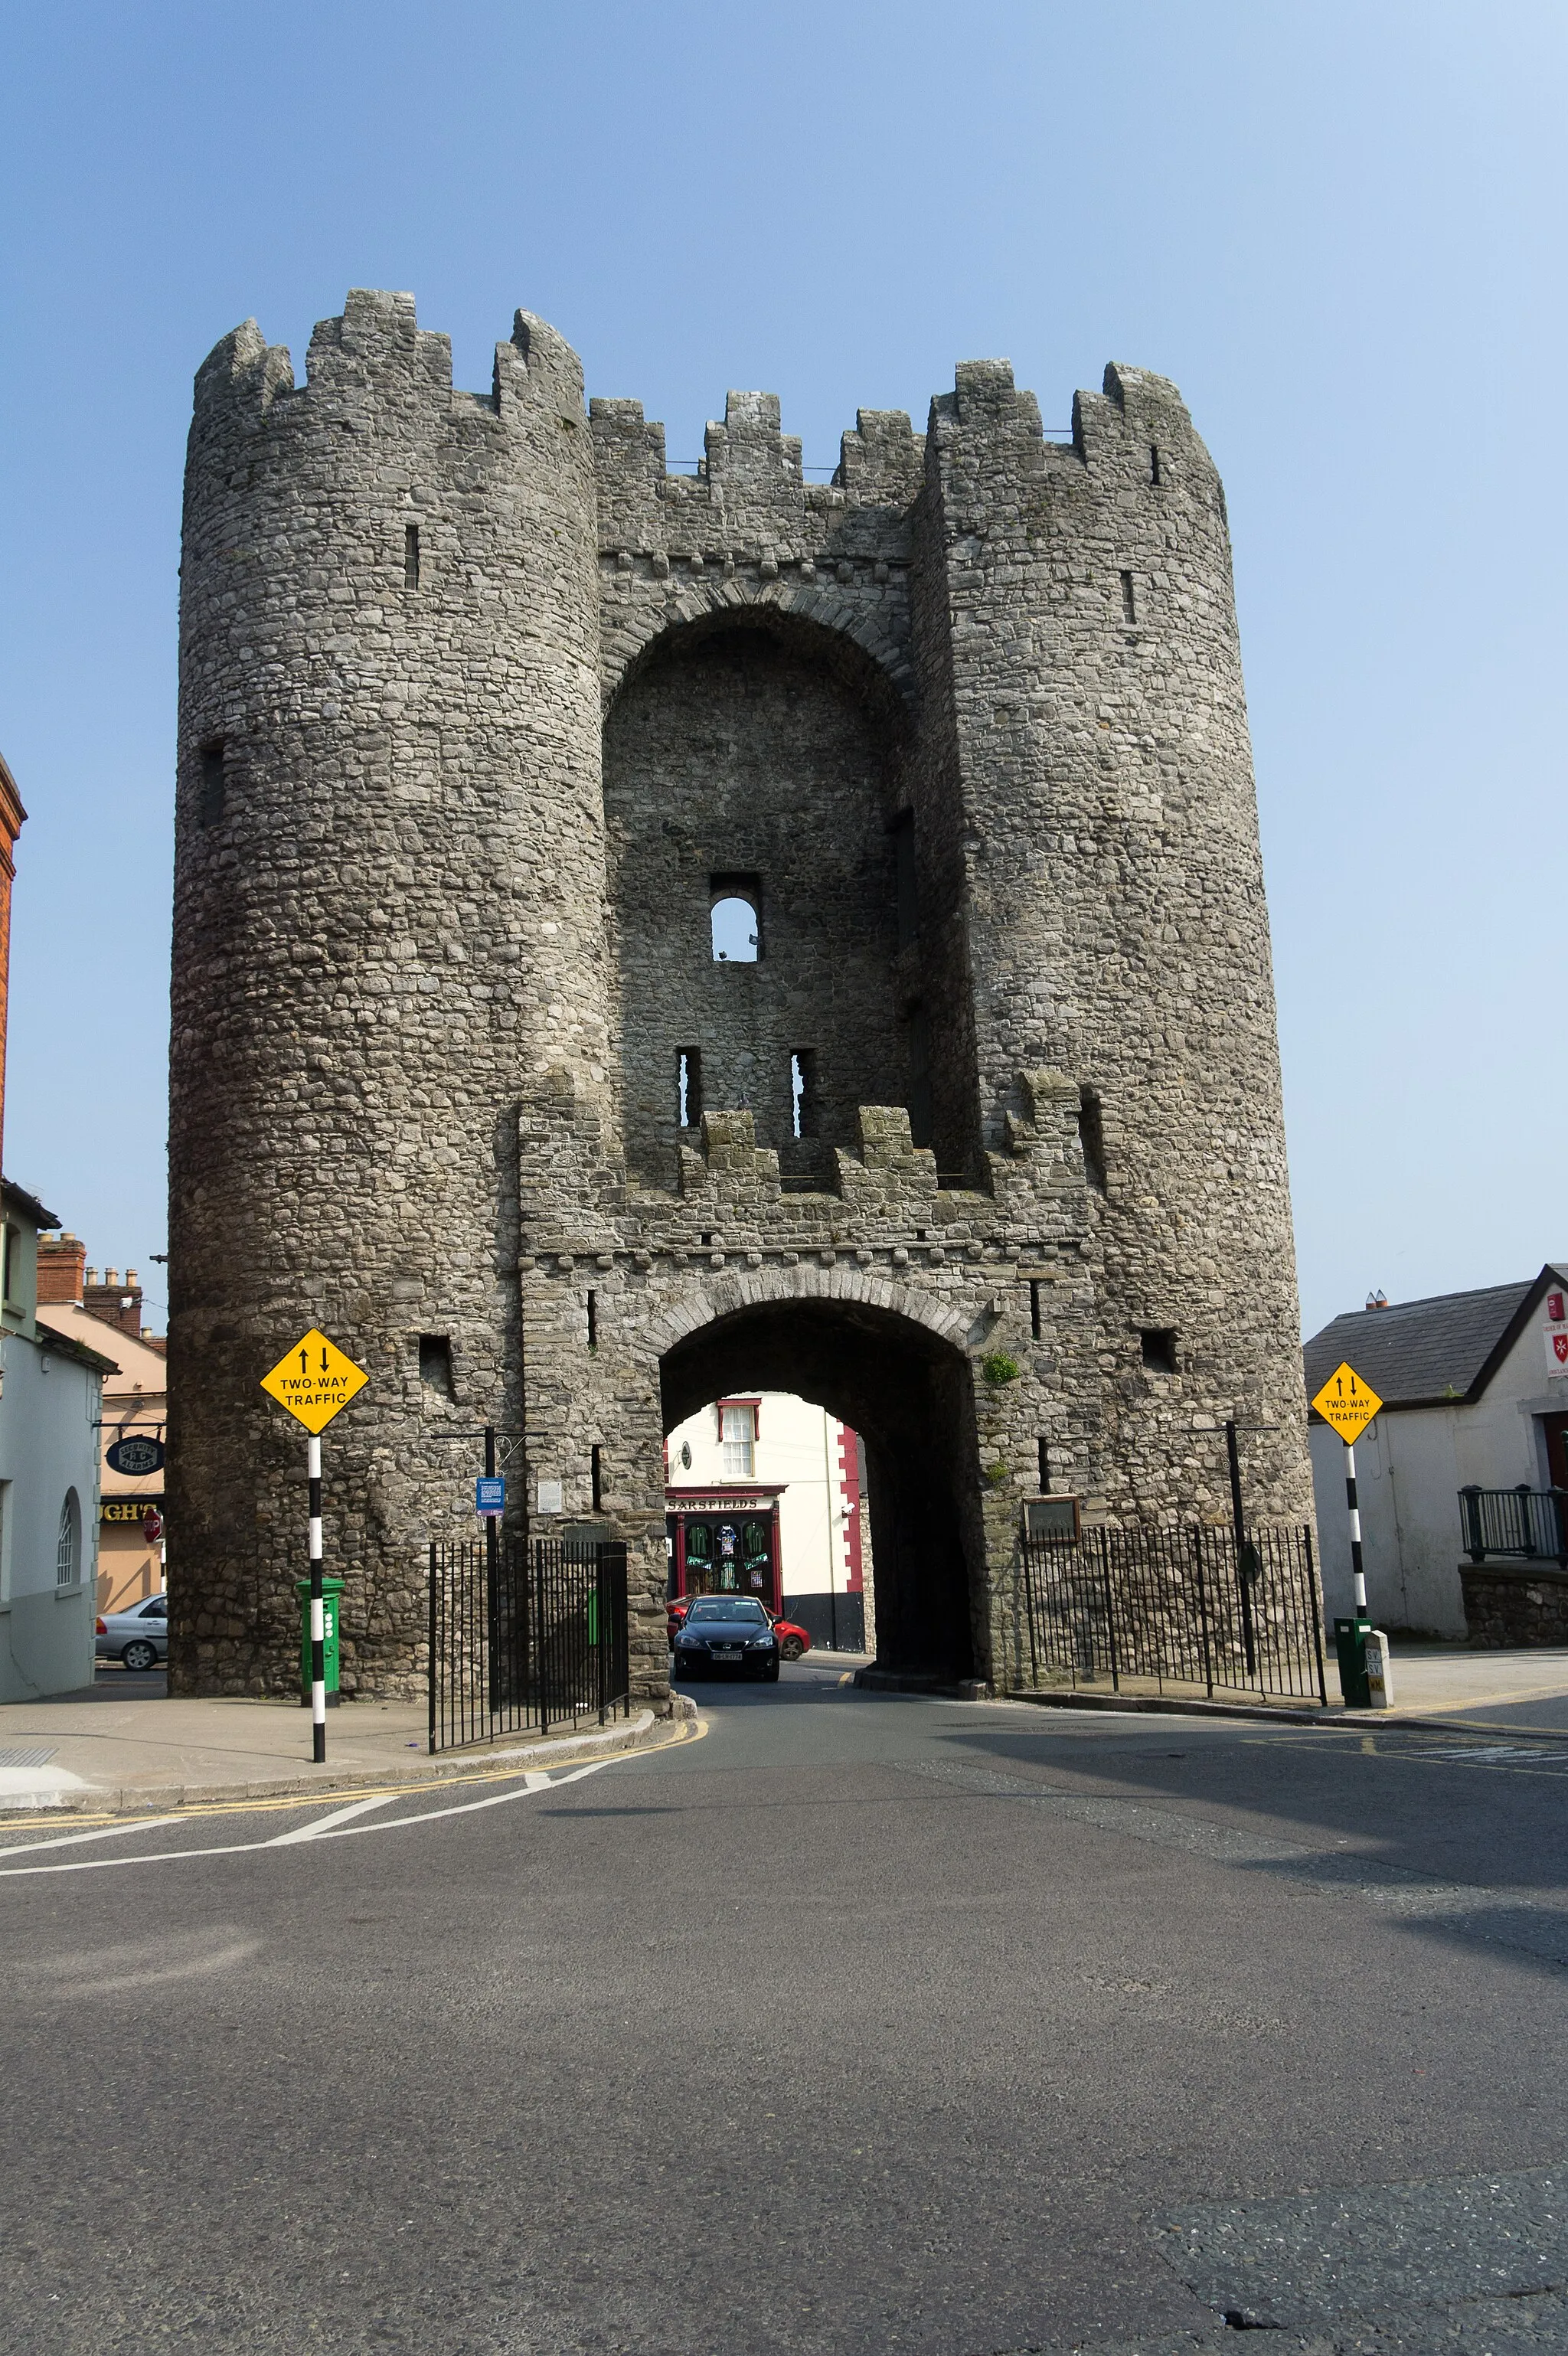 Photo showing: Laurence's Gate is a barbican which was built in the 13th century as part of the walled fortifications of the medieval town of Drogheda, County Louth, in Ireland. The original names for Laurence St and Laurence's Gate were East St and East Gate, respectively. In the 14th century, the street and Gate were renamed because they led to the hospital of St. Laurence, which stood close to the Cord church.
It consists of two towers, each with four floors, joined by a bridge at the top and an entrance arch at street level. Entry is gained up a flight of stairs in the south tower. There is a slot underneath the arch from where a portcullis could be raised and lowered.
Historians have wondered why such an enormous barbican was built here in the east of the town, when the main artery through the town has always been north/south. For example, a similar barbican in Canterbury is less than half the height of Laurence's Gate. However, from the top of the Gate, the estuary of the Boyne and the four mile stretch of river from there to Drogheda can be clearly observed. This is the only point in the town with a clear view of any potential sea invasion. This is proposed as a reason why Lawrence's Gate was built to such a height.

A portion of the town wall remains to the south of Laurence's Gate. North of Laurence's Gate, the wall ran up Palace St/King St where the footpath is today. The depth of the basements of the houses and school suggest the presence of a steep trench outside the wall. Over the centuries, as the walls and gates fell into disrepair, the rubble stones were reused in later buildings. For example, the house and walls at the corner of Laurence and Palace St and stone walls in Constitution Hill. Old pictures show that a toll booth and gate house remained until the early 19th century. The shop beside Laurence's Gate was a bicycle shop 100 years ago. The green letter box dates from a time when there was a post office there.